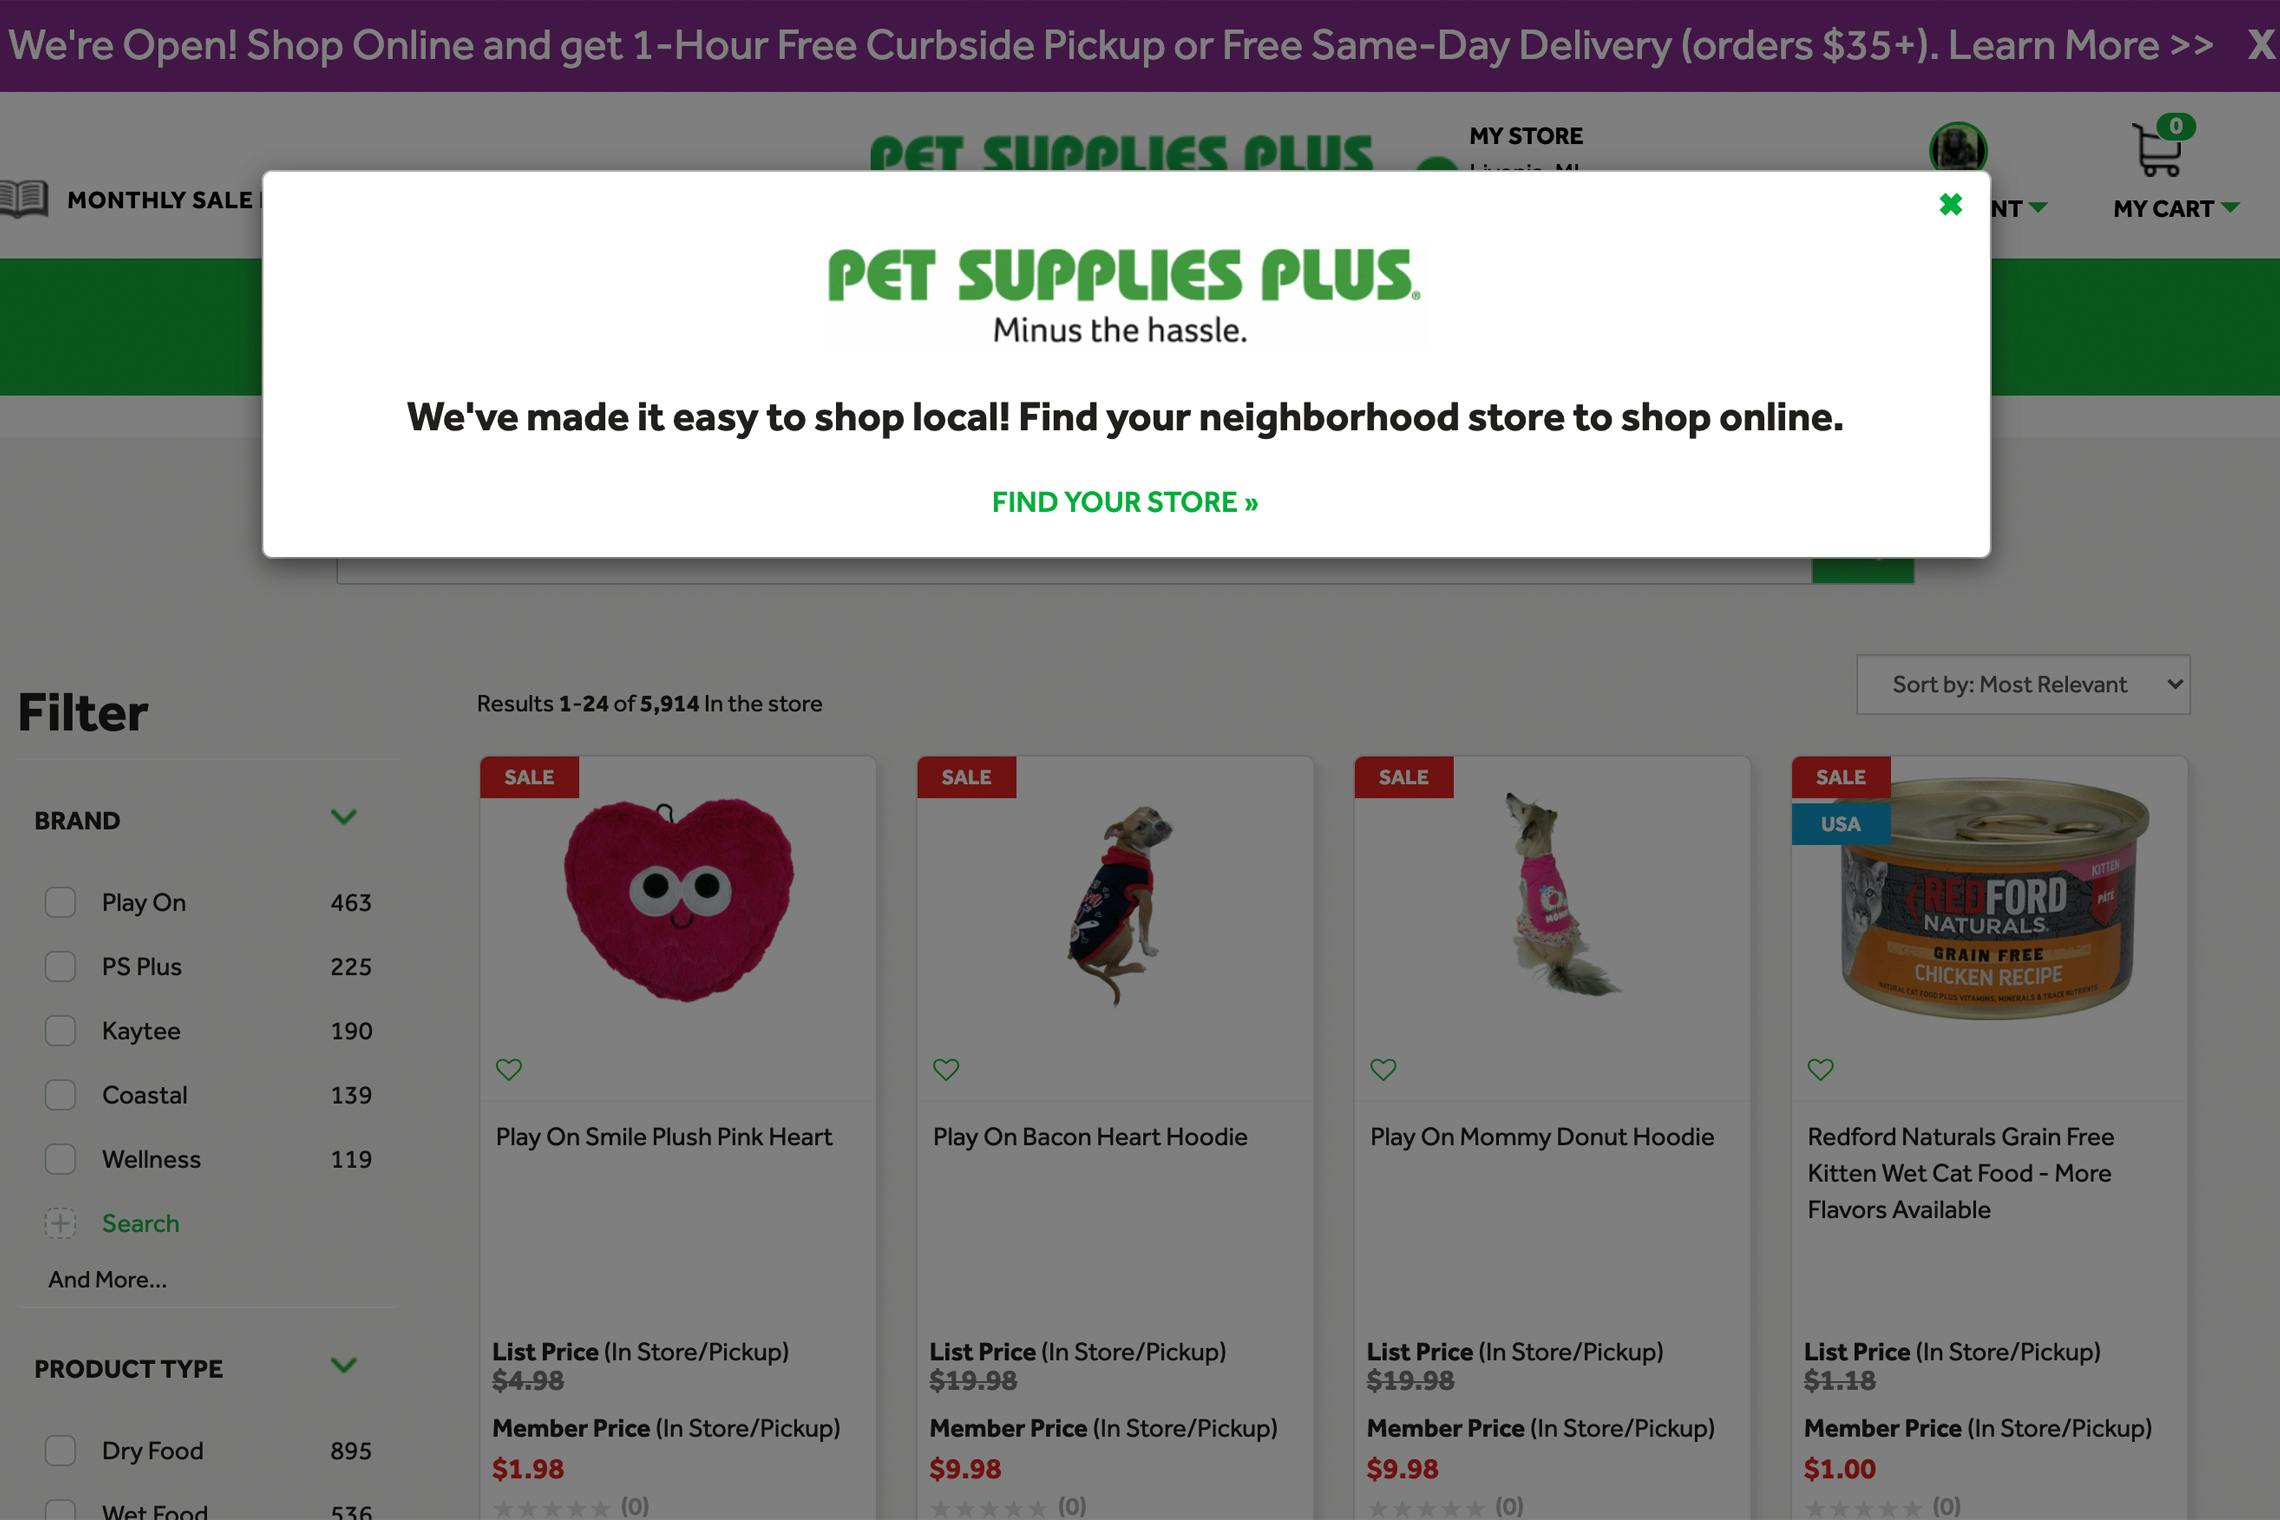 Screenshot of the Pet Supplies Plus website with the Find Your Store pop-up.